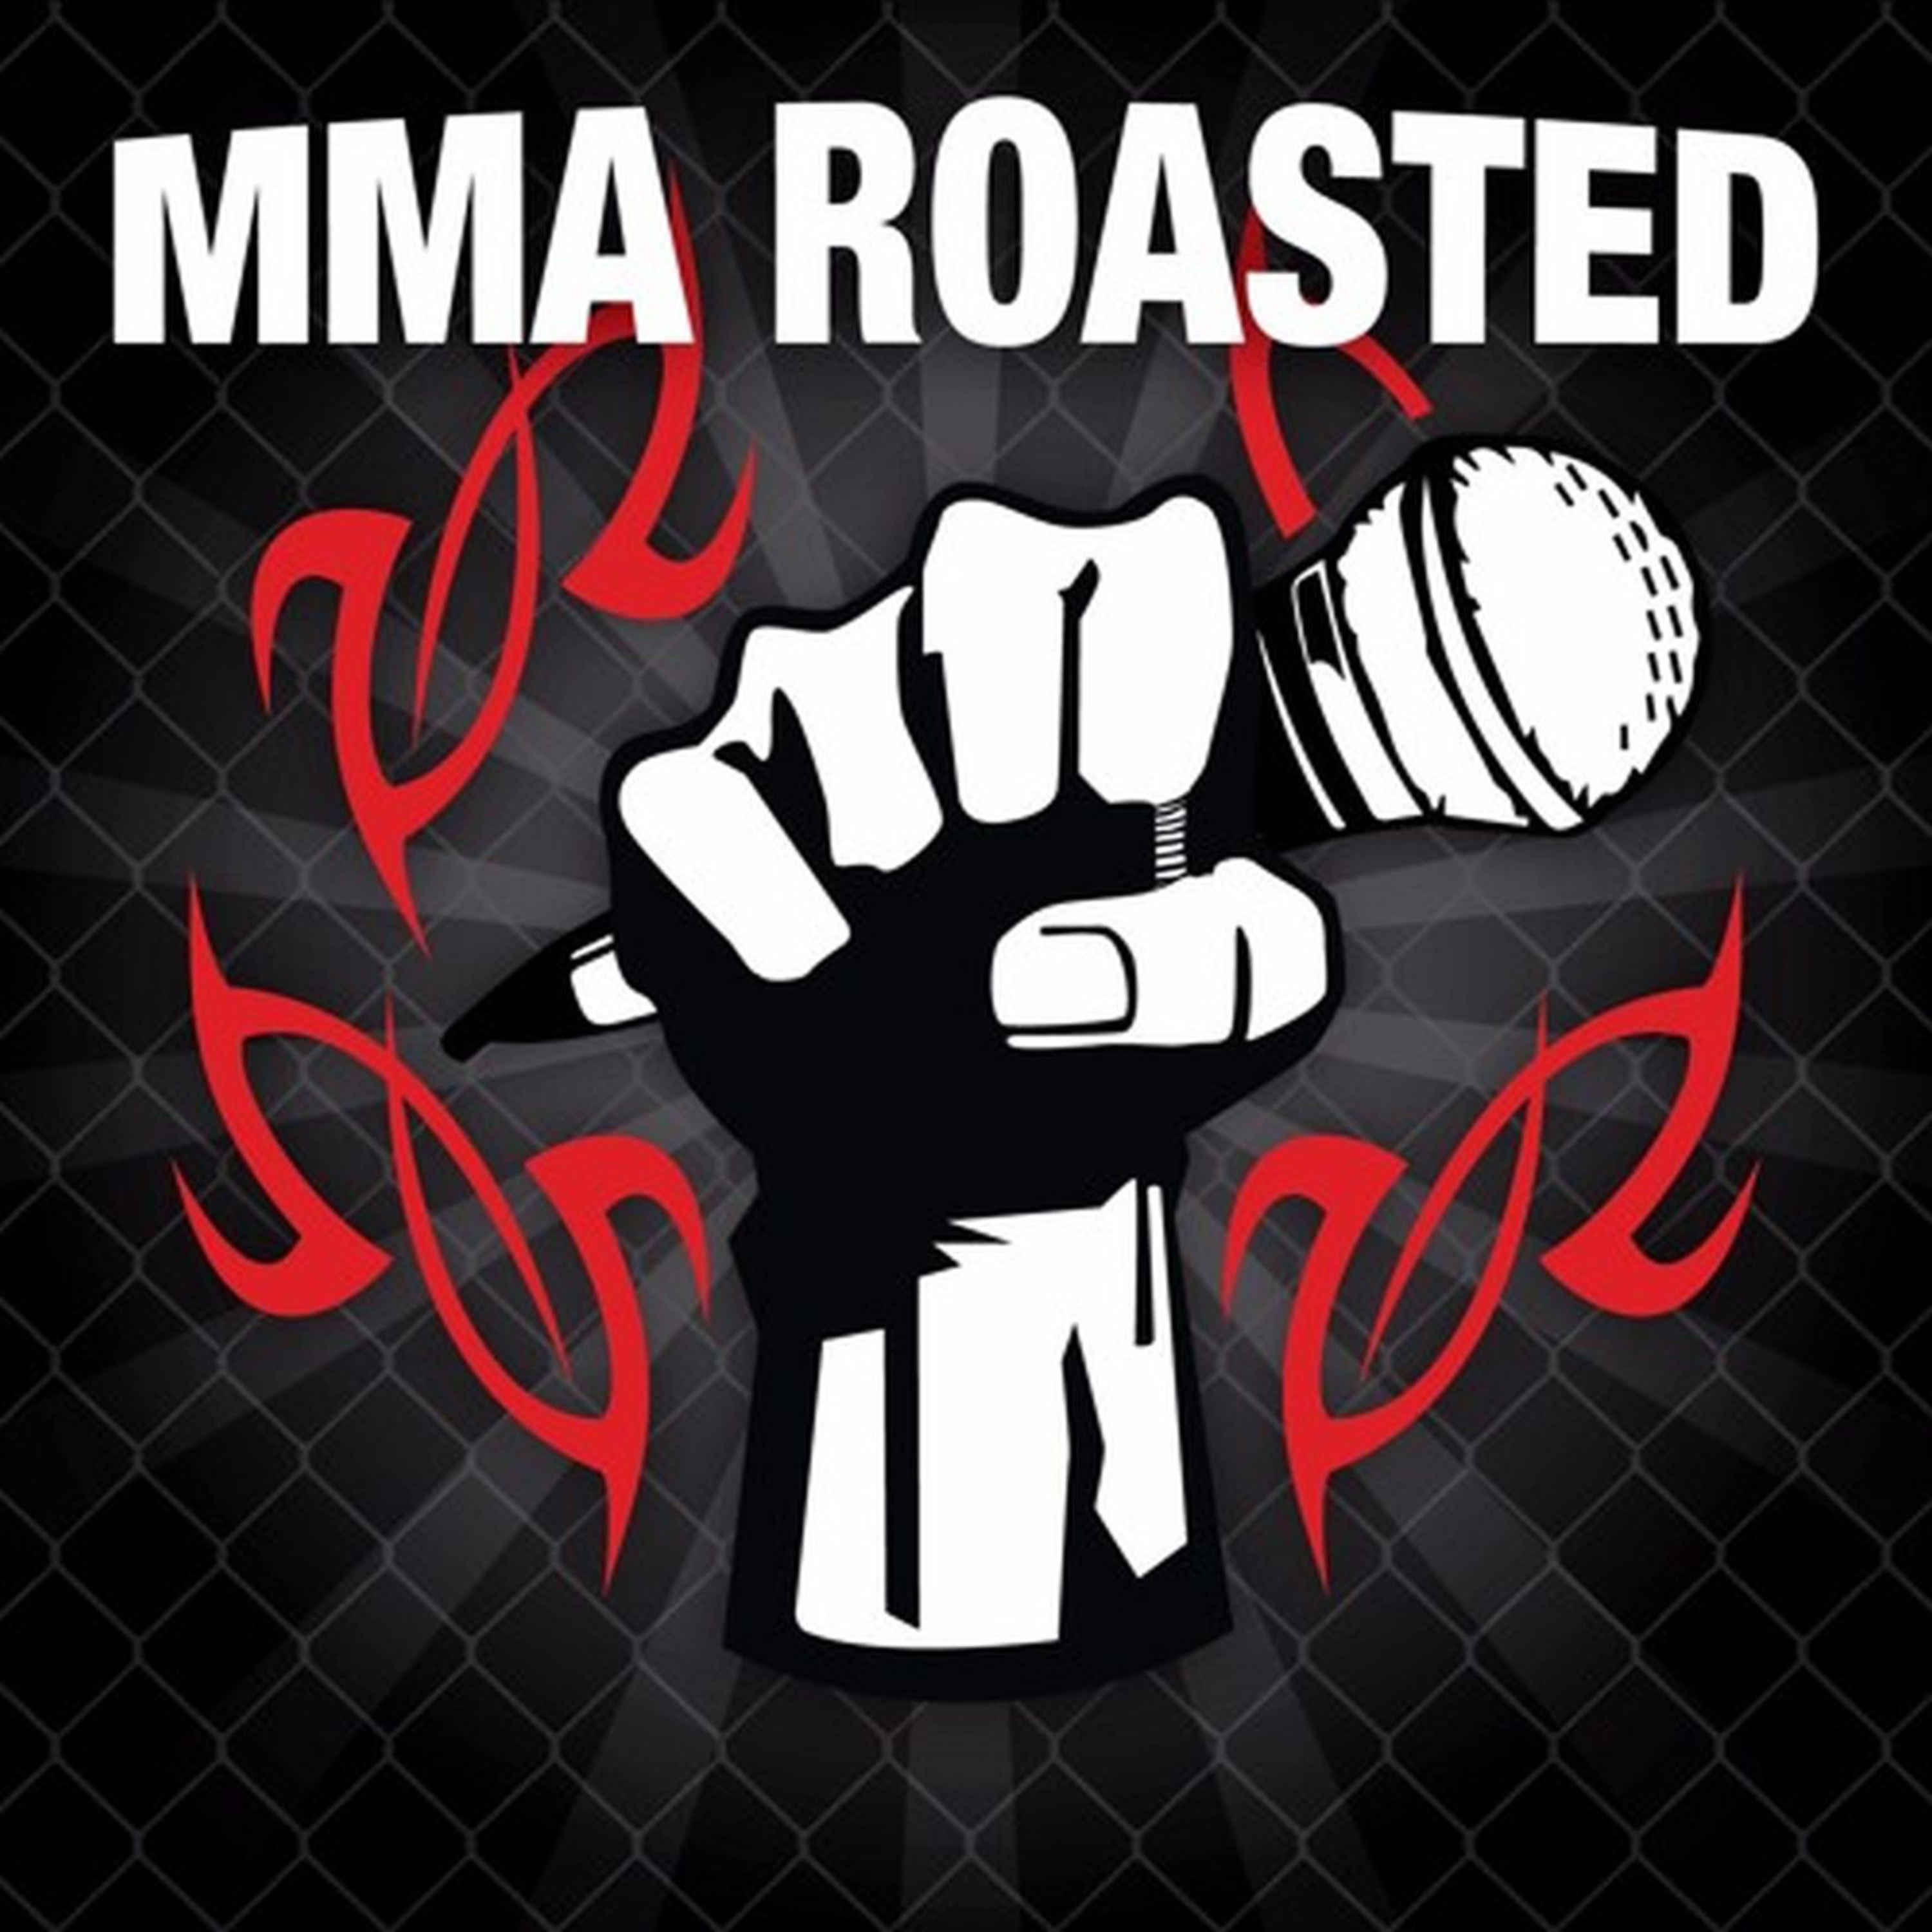 A highlight from Merab Dvalishvili & Britain Beltran - UFC 269 PREVIEW | MMA Roasted #690